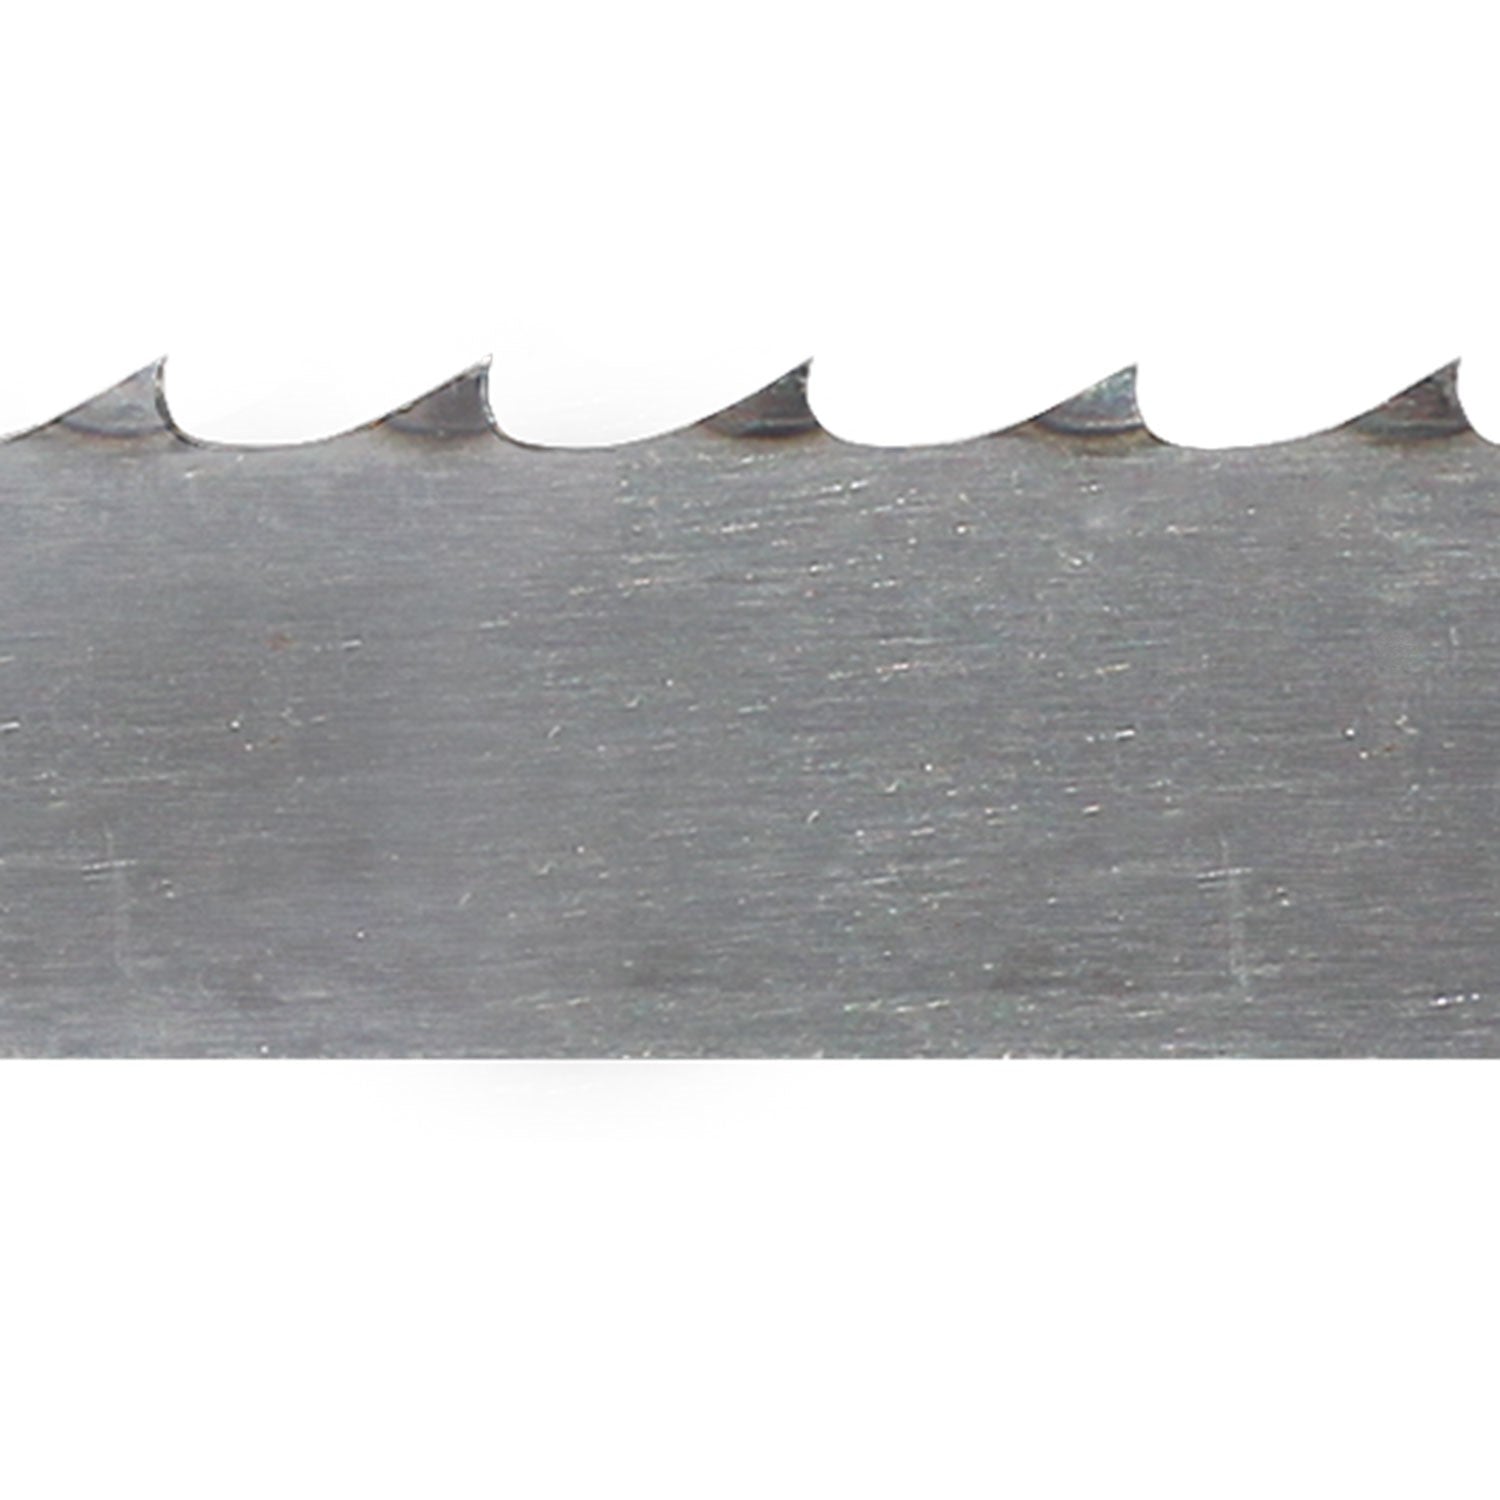 Meat Band Saw Blade - Carcass Splitter - 119 in. x 3/4 in. x .022 in. x 3 TPI - Pack of 20